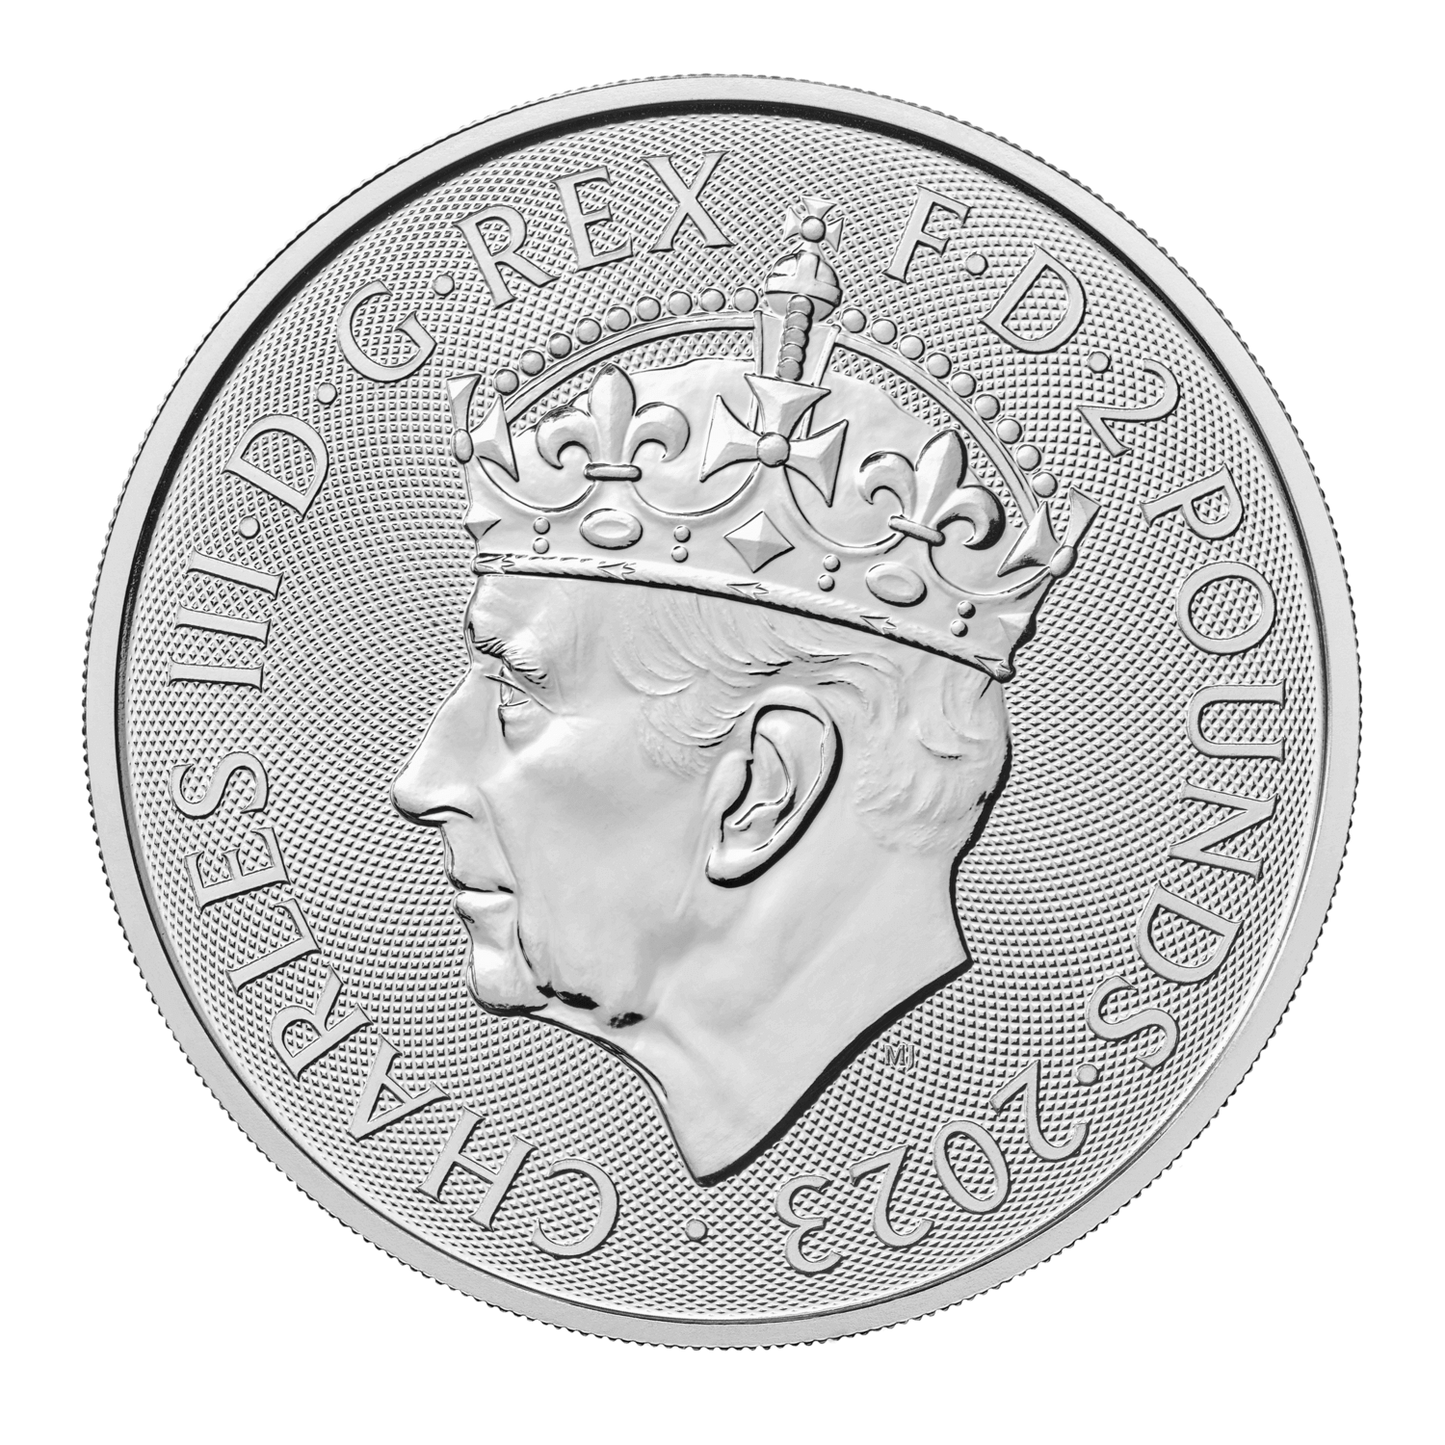 The Coronation of His Majesty King Charles III 2023 1oz Silver Coin